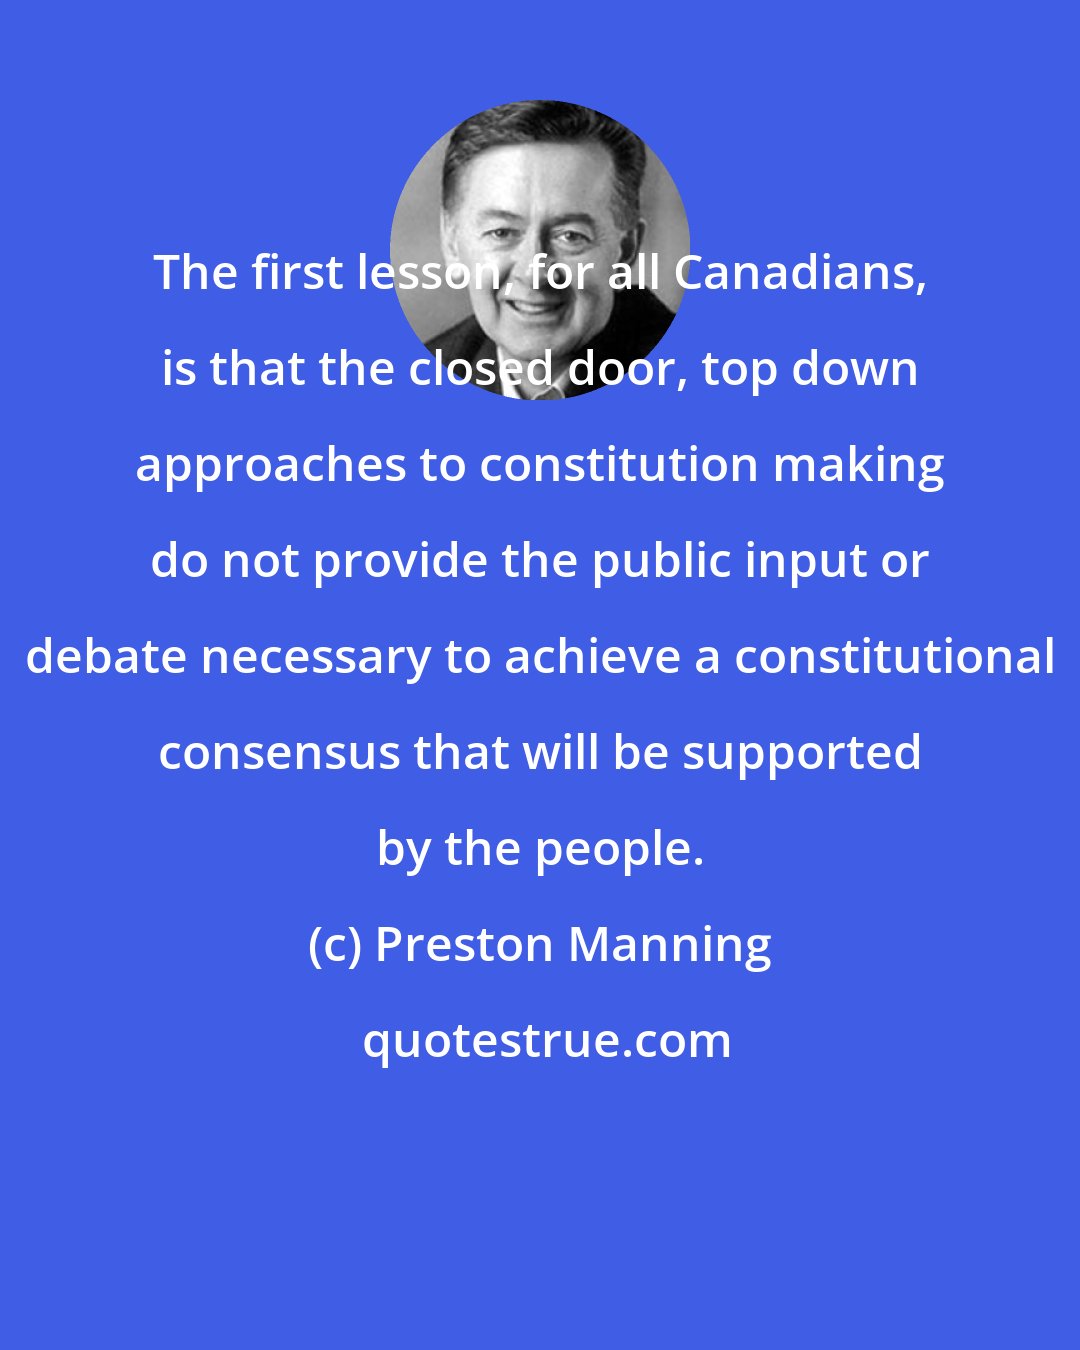 Preston Manning: The first lesson, for all Canadians, is that the closed door, top down approaches to constitution making do not provide the public input or debate necessary to achieve a constitutional consensus that will be supported by the people.